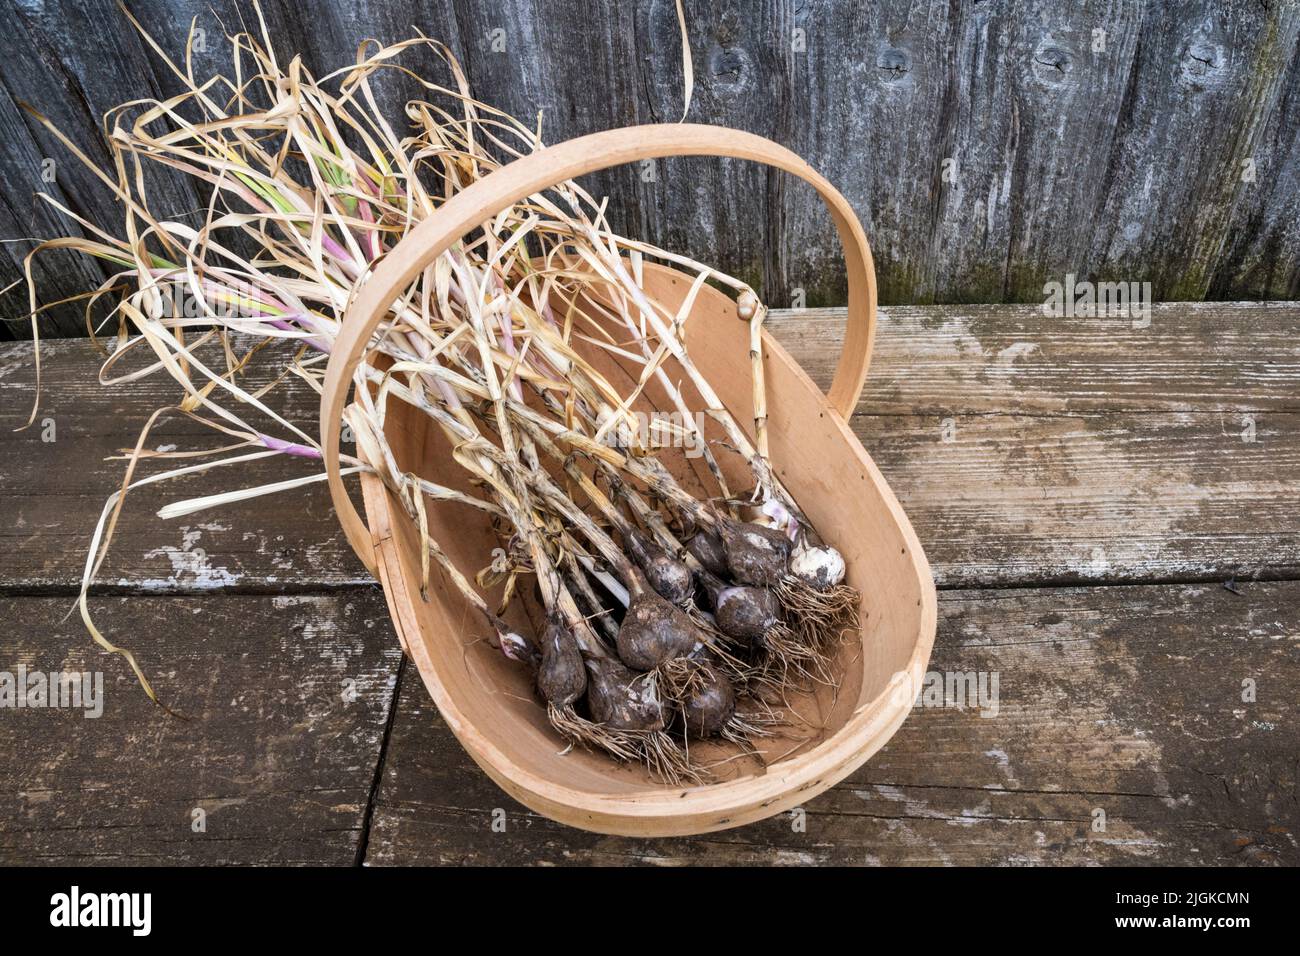 A trug containing picked home-grown garlic, Allium sativum, from the vegetable garden or allotment. Stock Photo